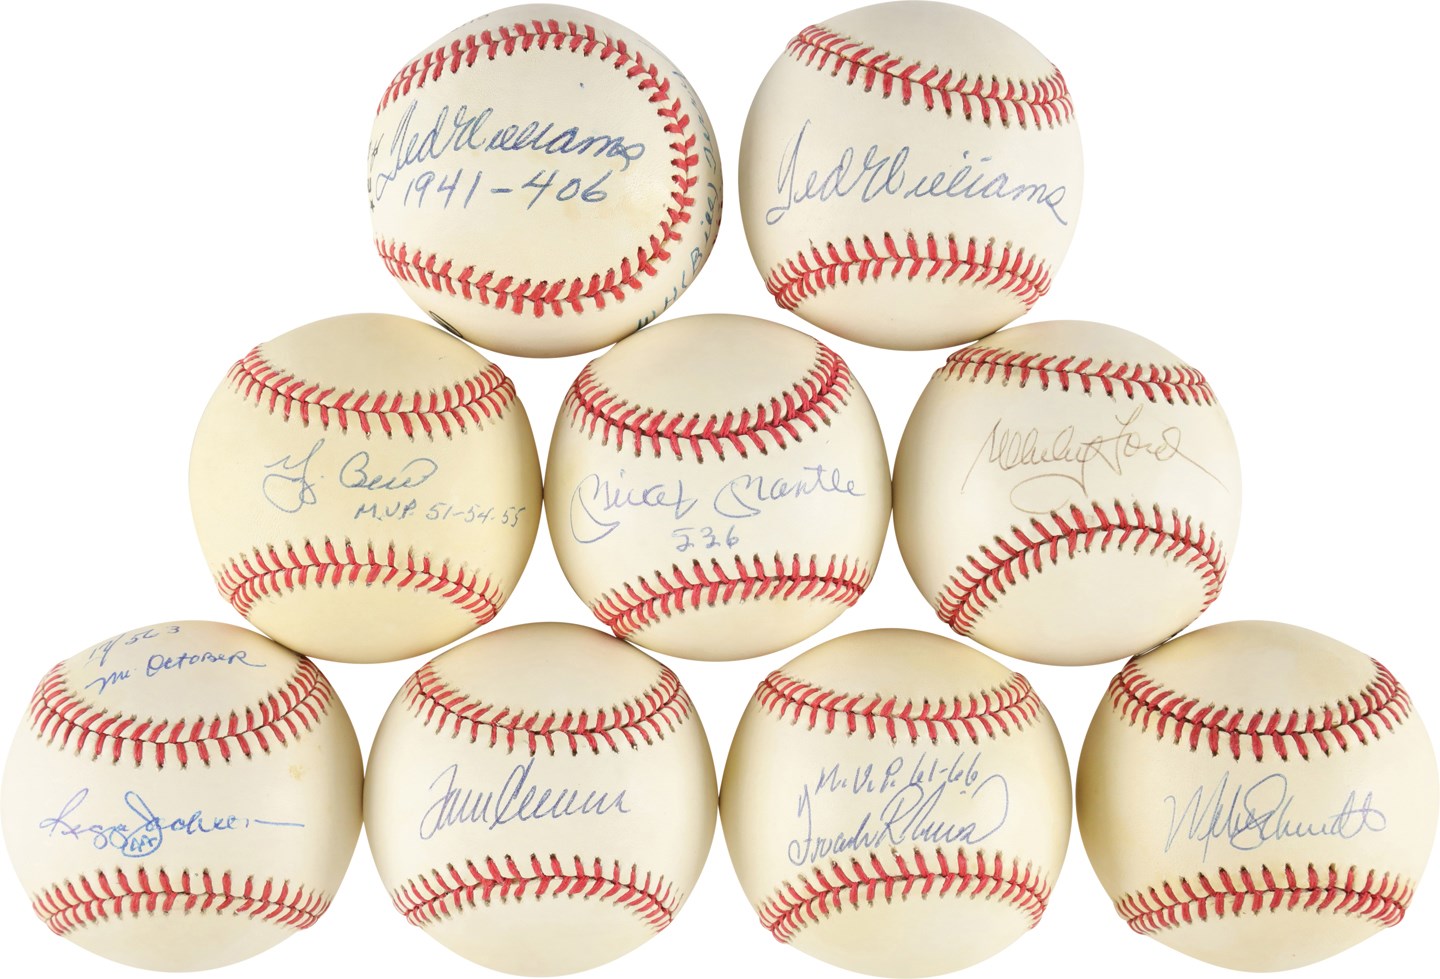 Hall of Famers Signed Baseball Collection w/Mantle & Williams (9)